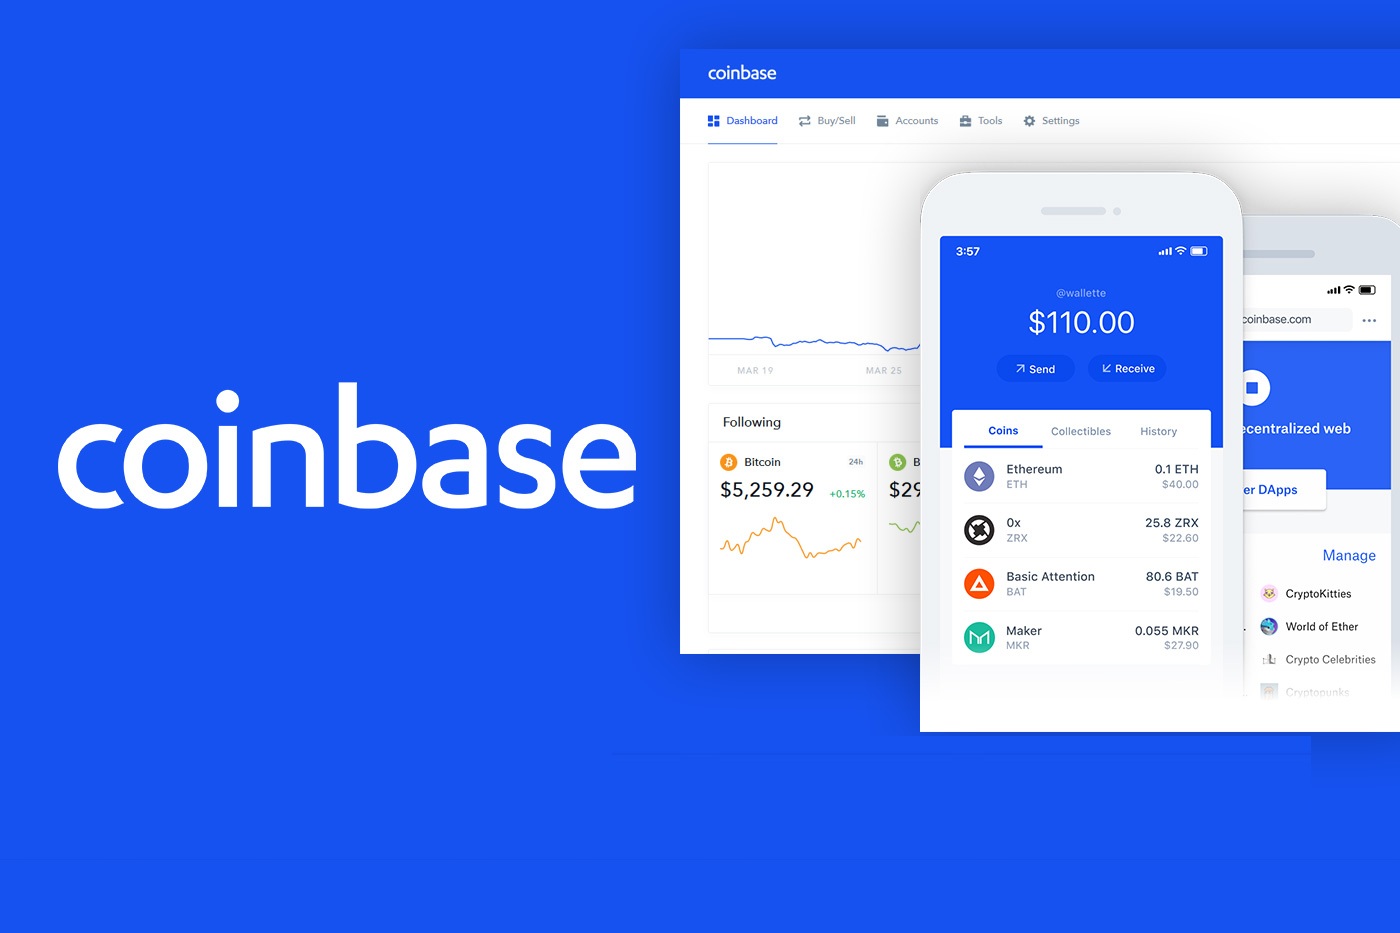 How to Get Started with Coinbase?